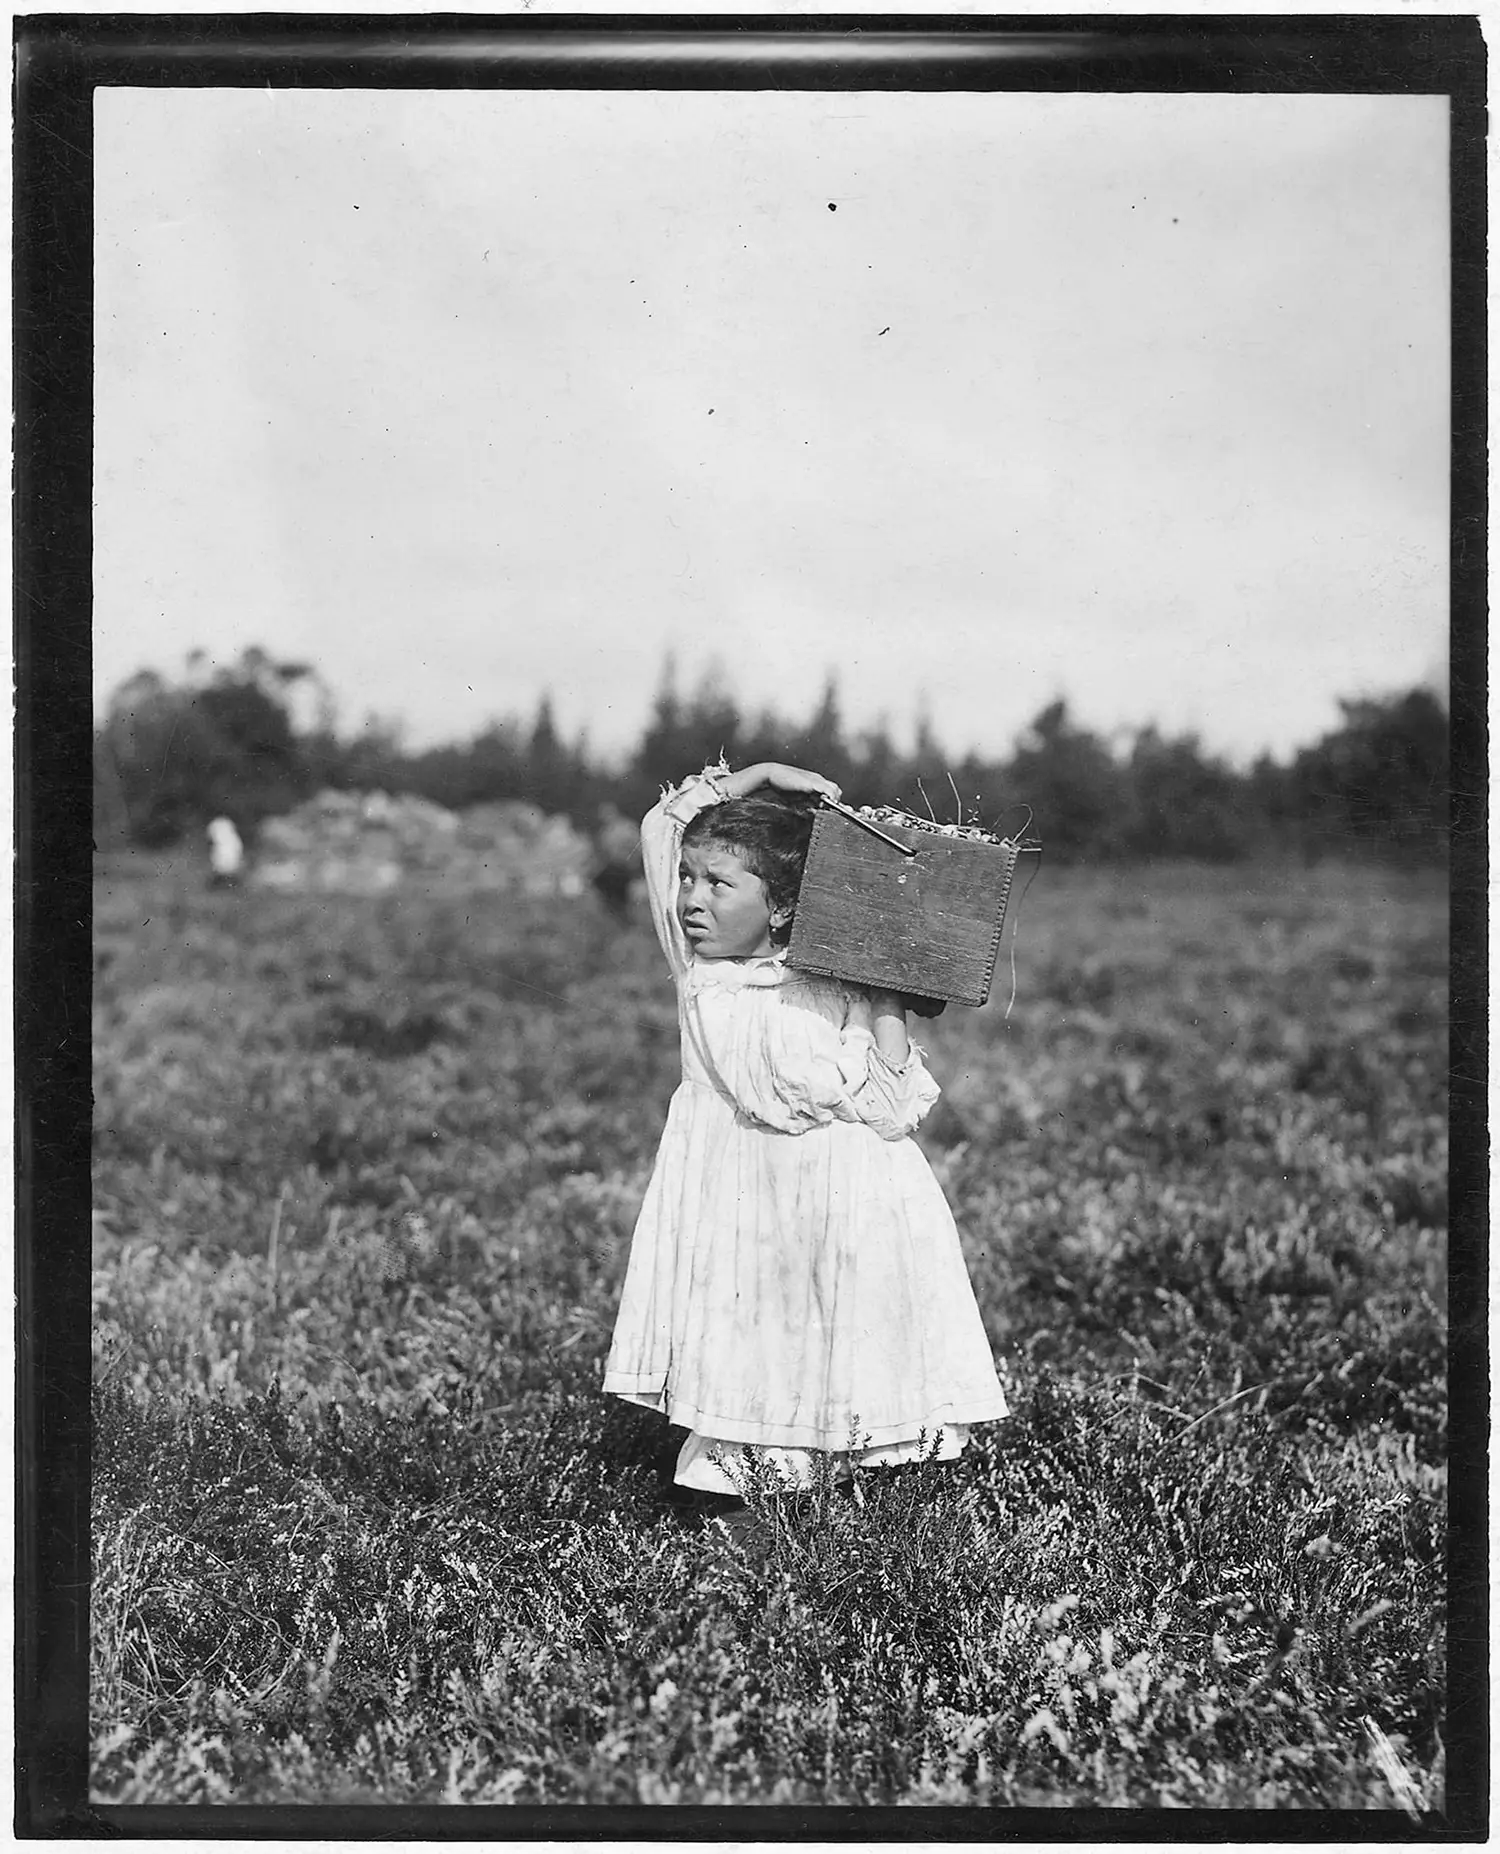 A small girl in a white dress stands alone in a field, carrying upon her shoulder a wooden box filled with cranberries.